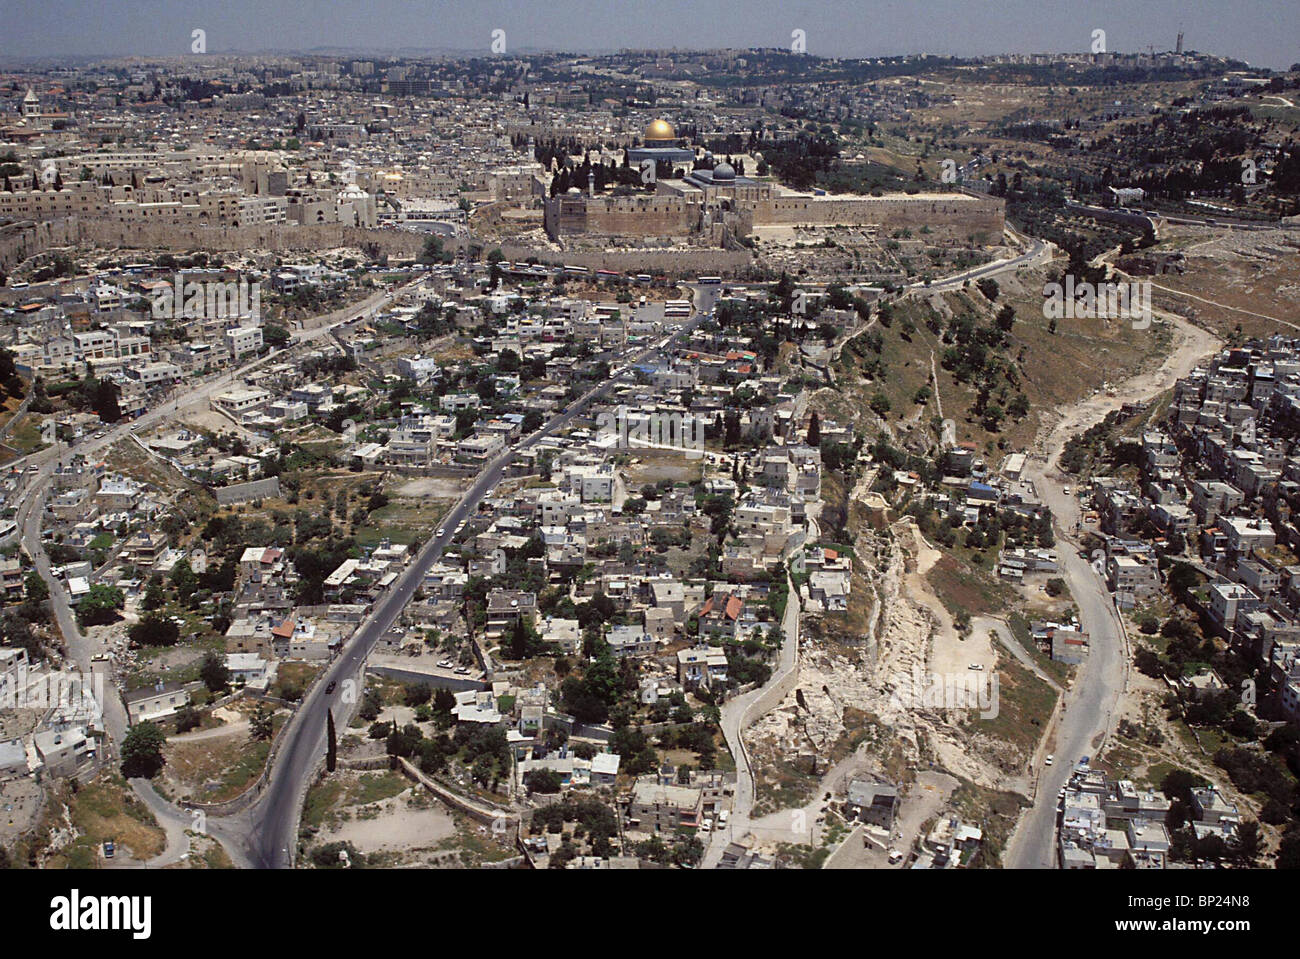 602. CITY OF DAVID - GENERAL VIEW FROM THE SOUTH WITH THE OLD CITY OF JERUSALEM IN THE BACKGROUND Stock Photo